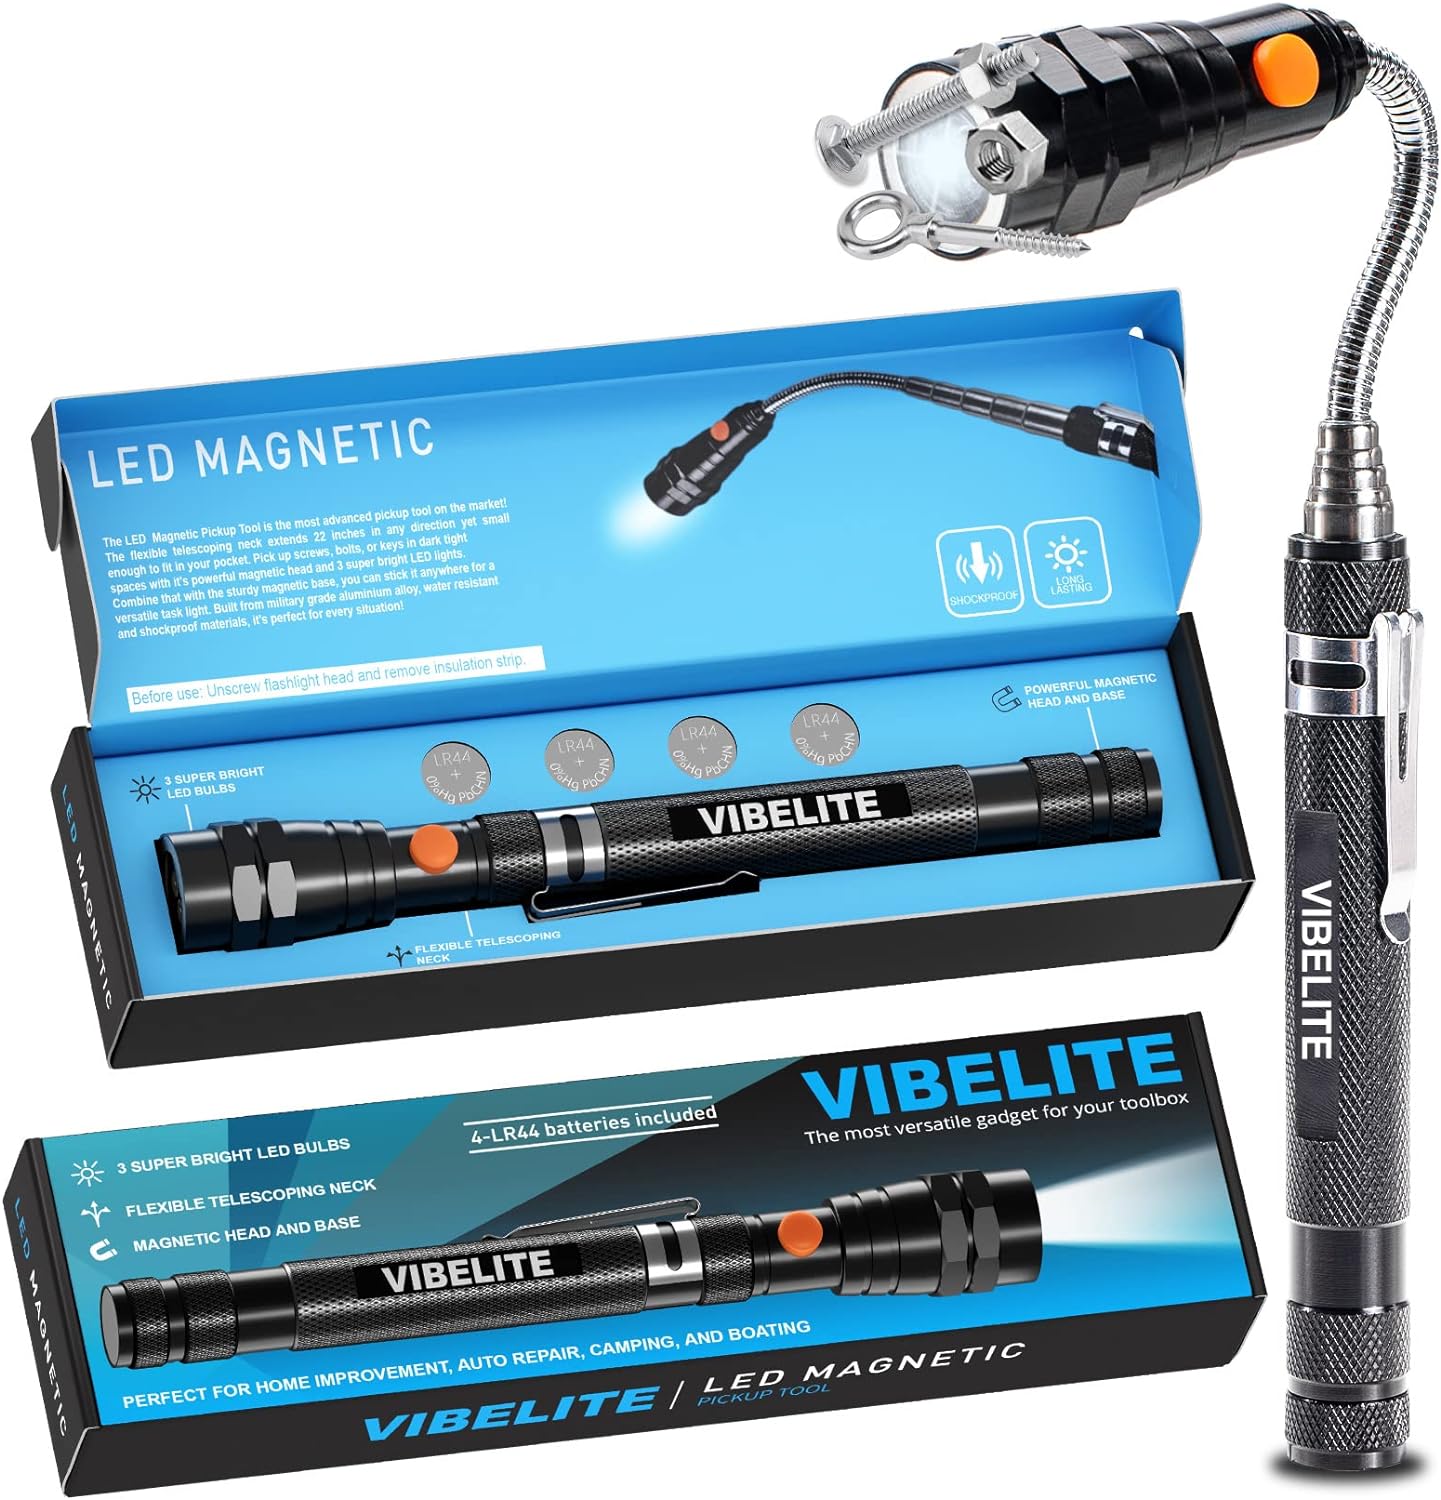 VIBELITE Magnet 3 LED Magnetic Pickup Tool, Telescoping Flexible Extendable Led Flashlights, Perfect Mechanic Pick-up Tools Gifts for Me